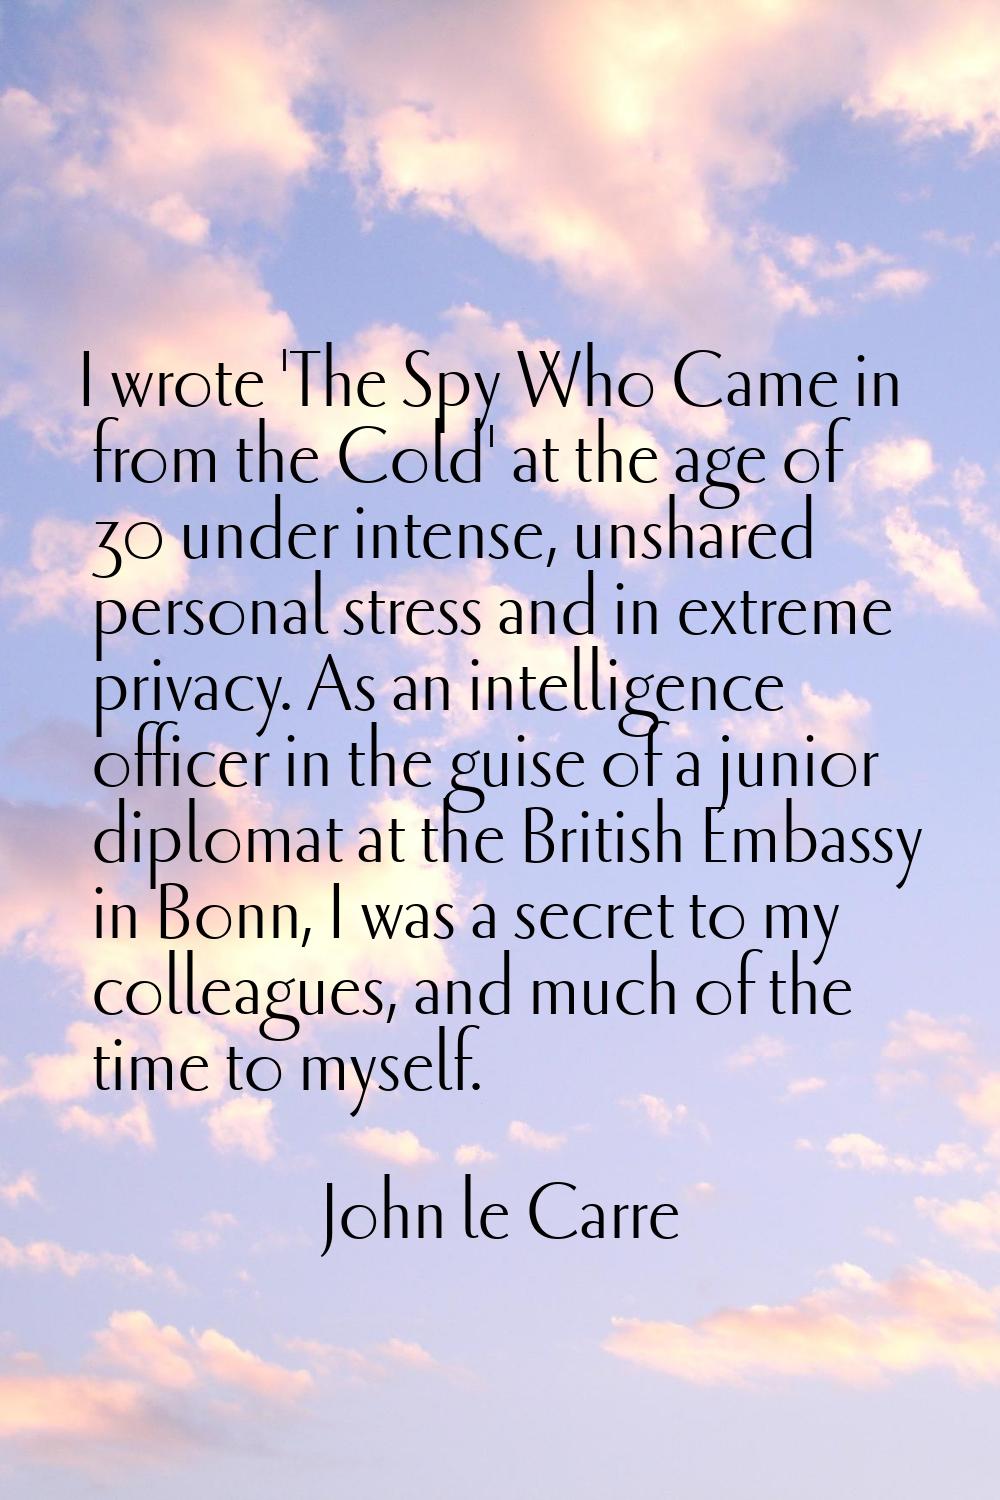 I wrote 'The Spy Who Came in from the Cold' at the age of 30 under intense, unshared personal stres